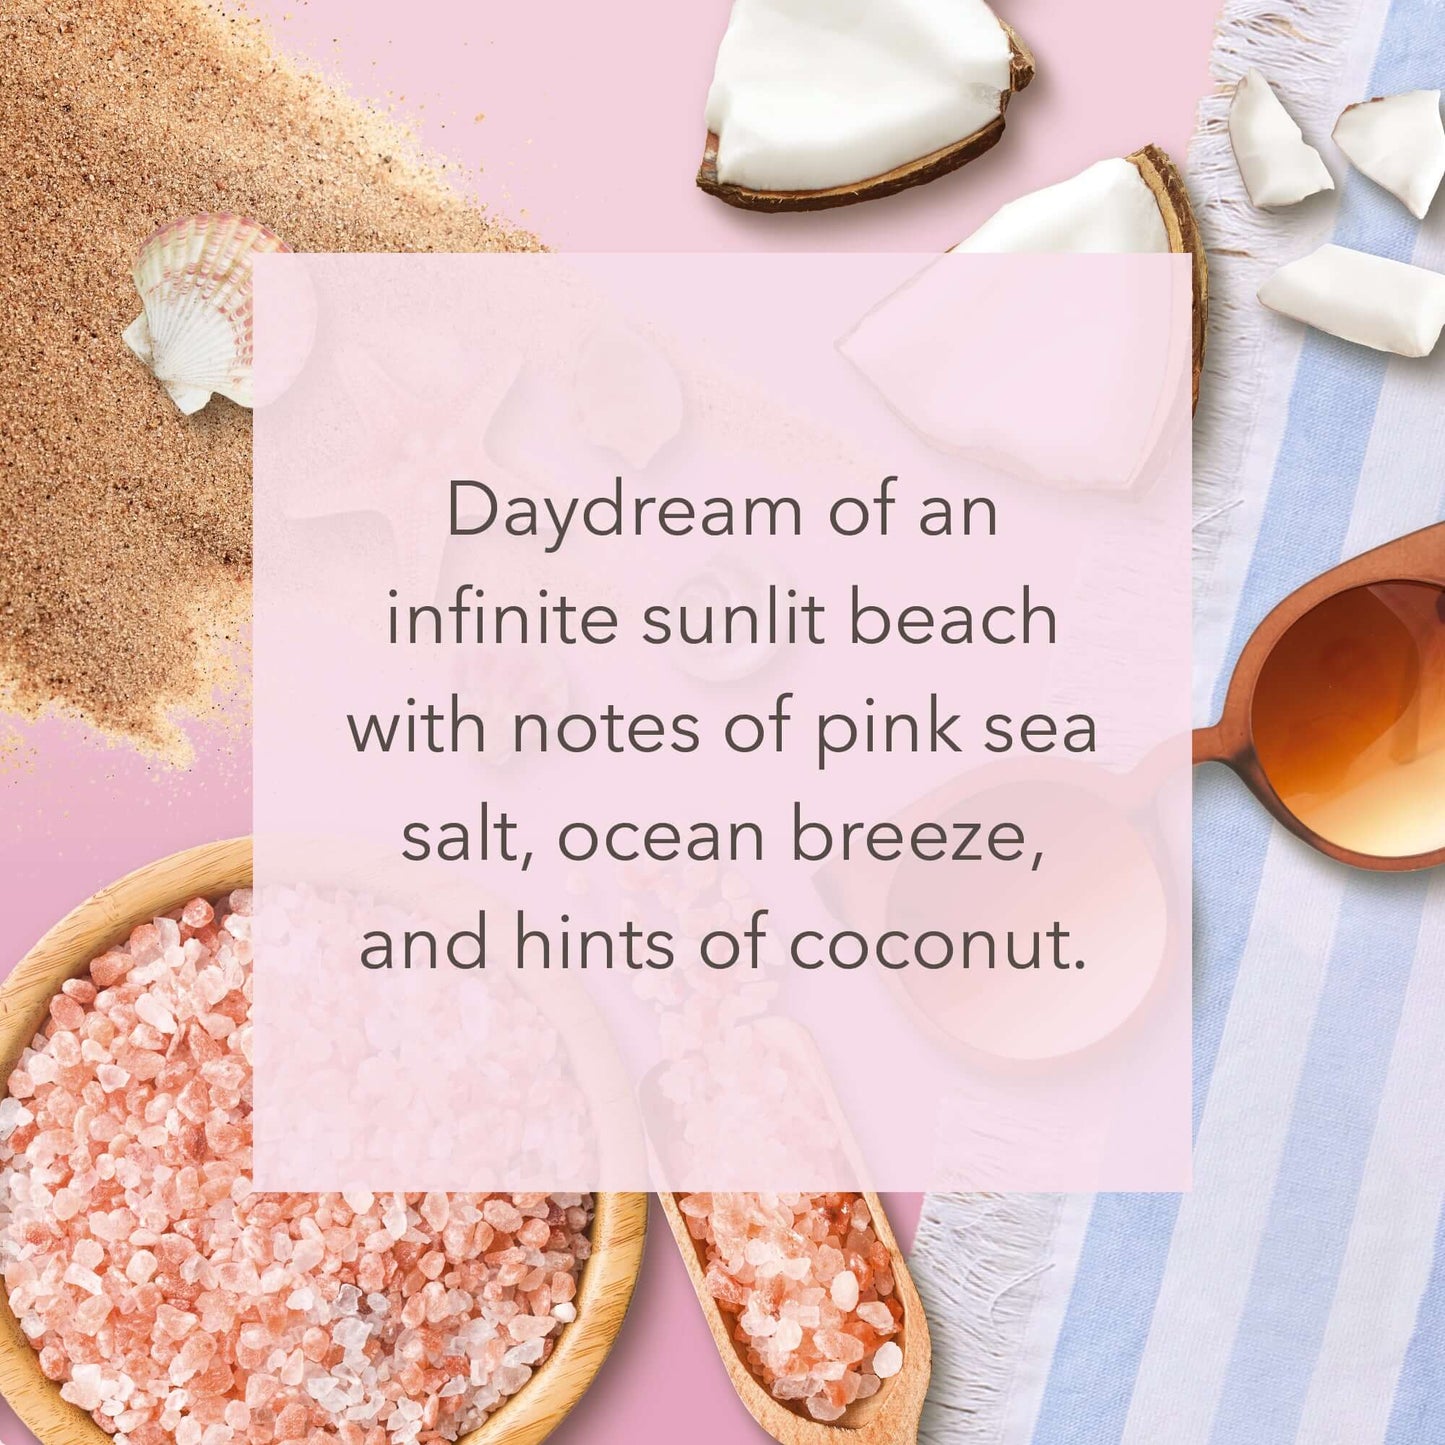 Summer Daydream Large Jar Daydream of an infinite sunlit beach with notes of pink sea salt, ocean breeze, and hints of coconut. 